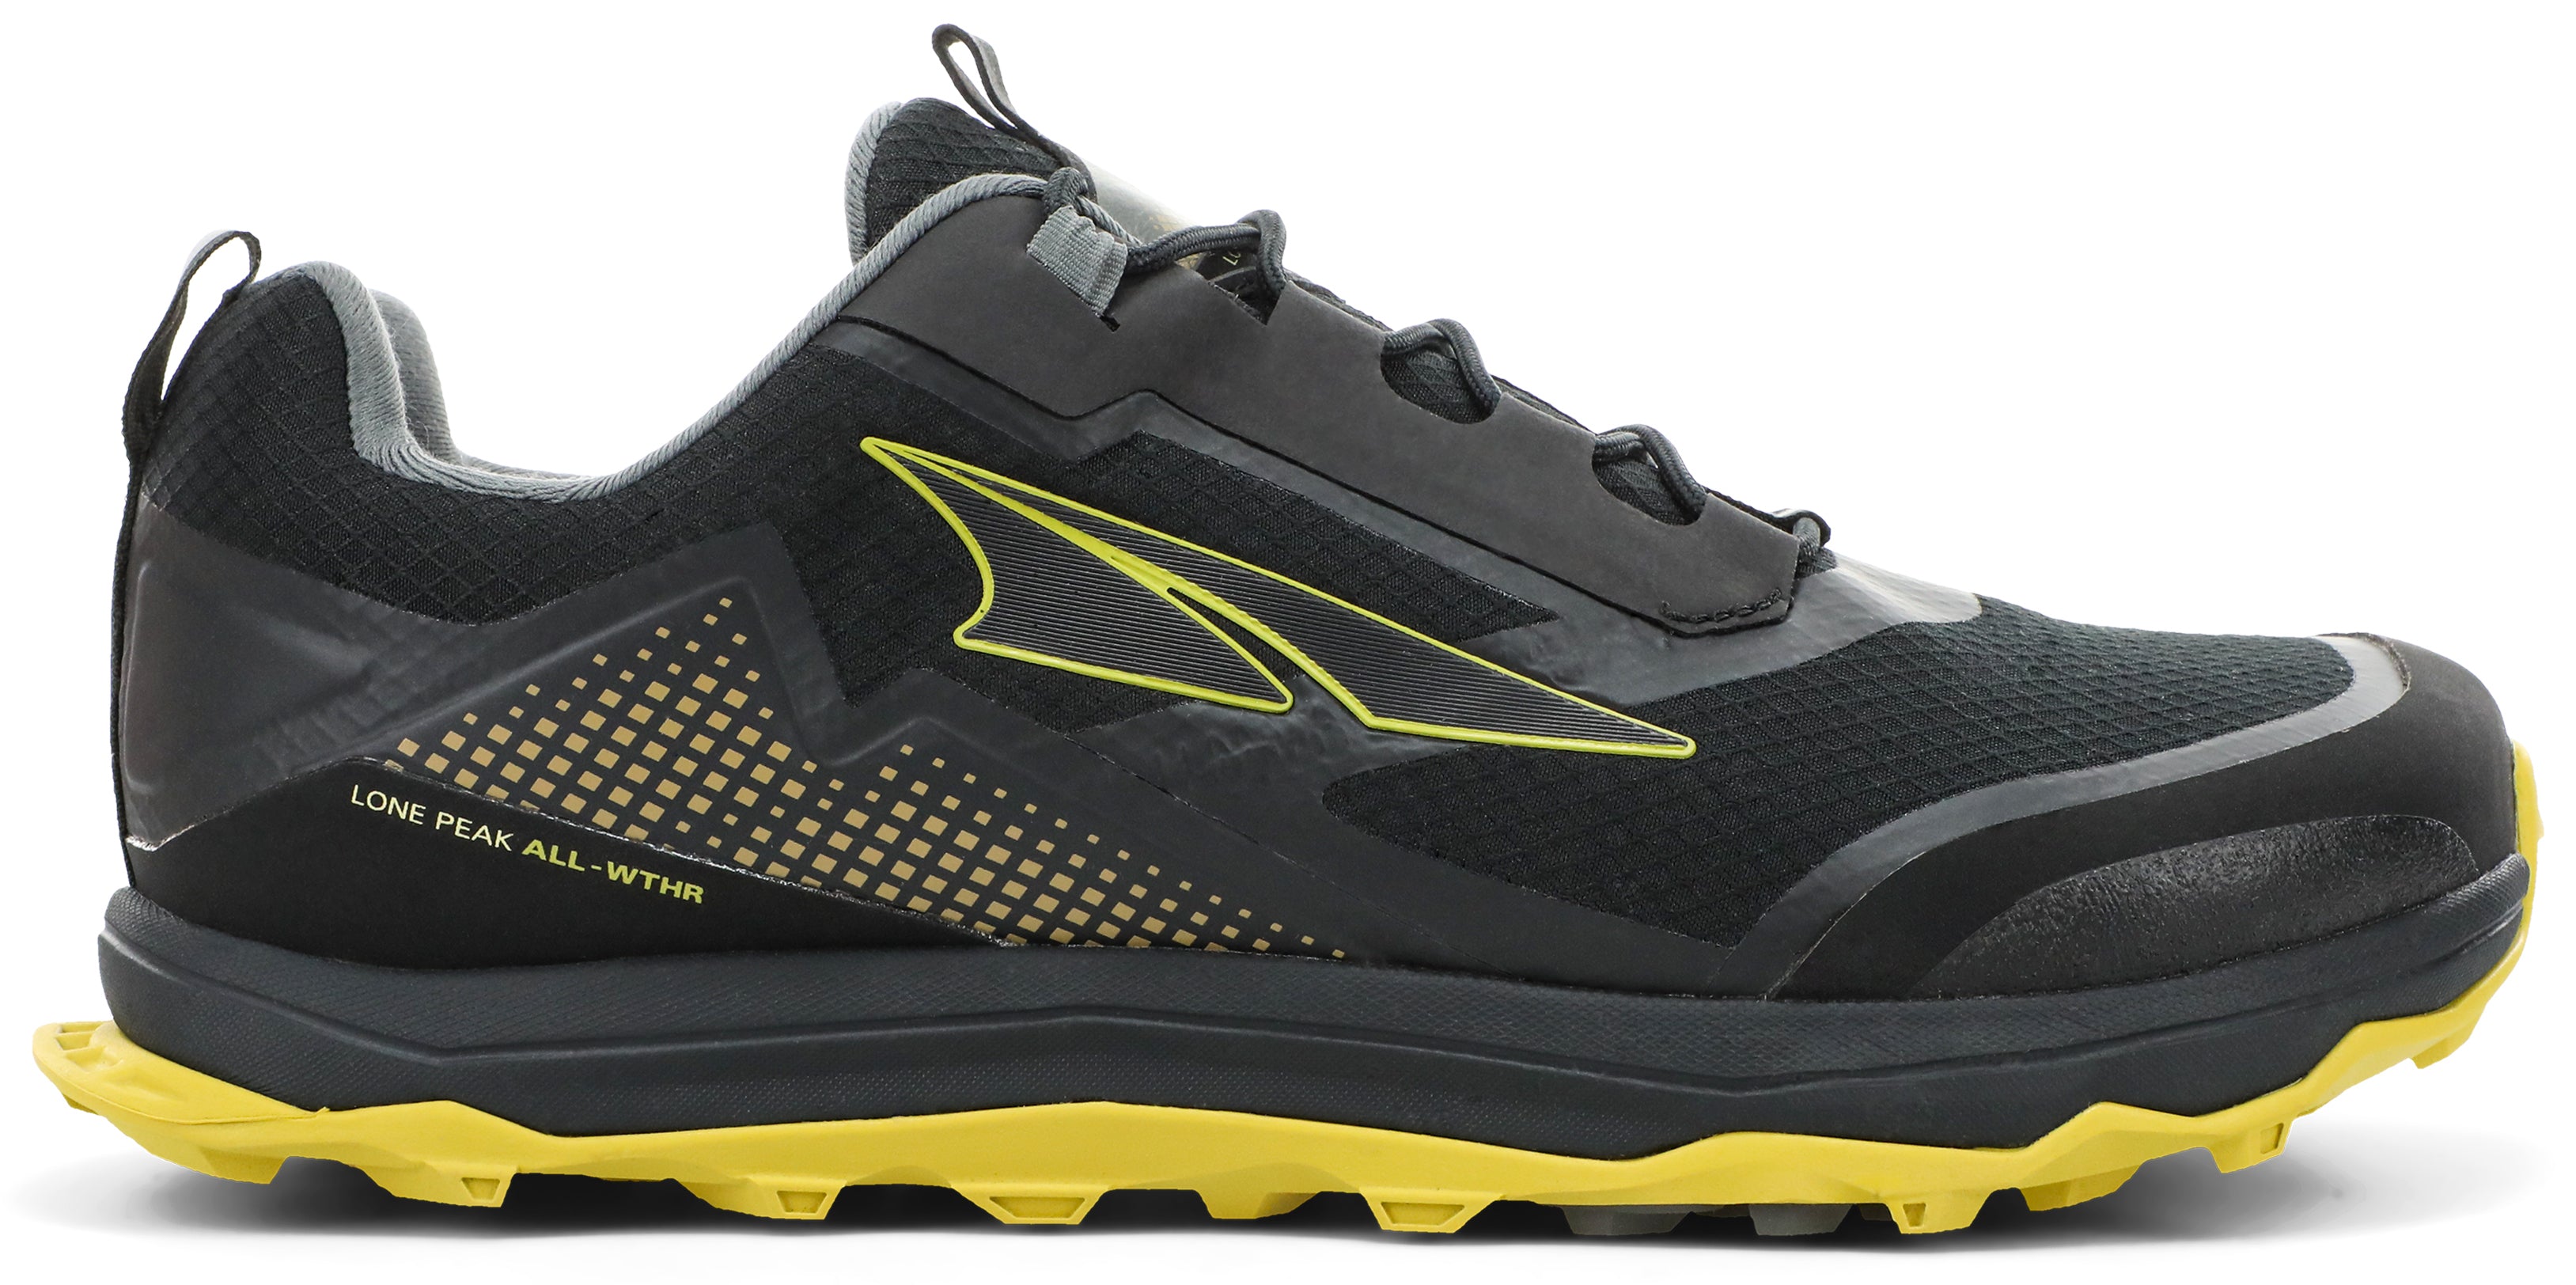 Altra Men's Lone Peak ALL-WTHR Low Trail Running Shoe in Black/Yellow from the side